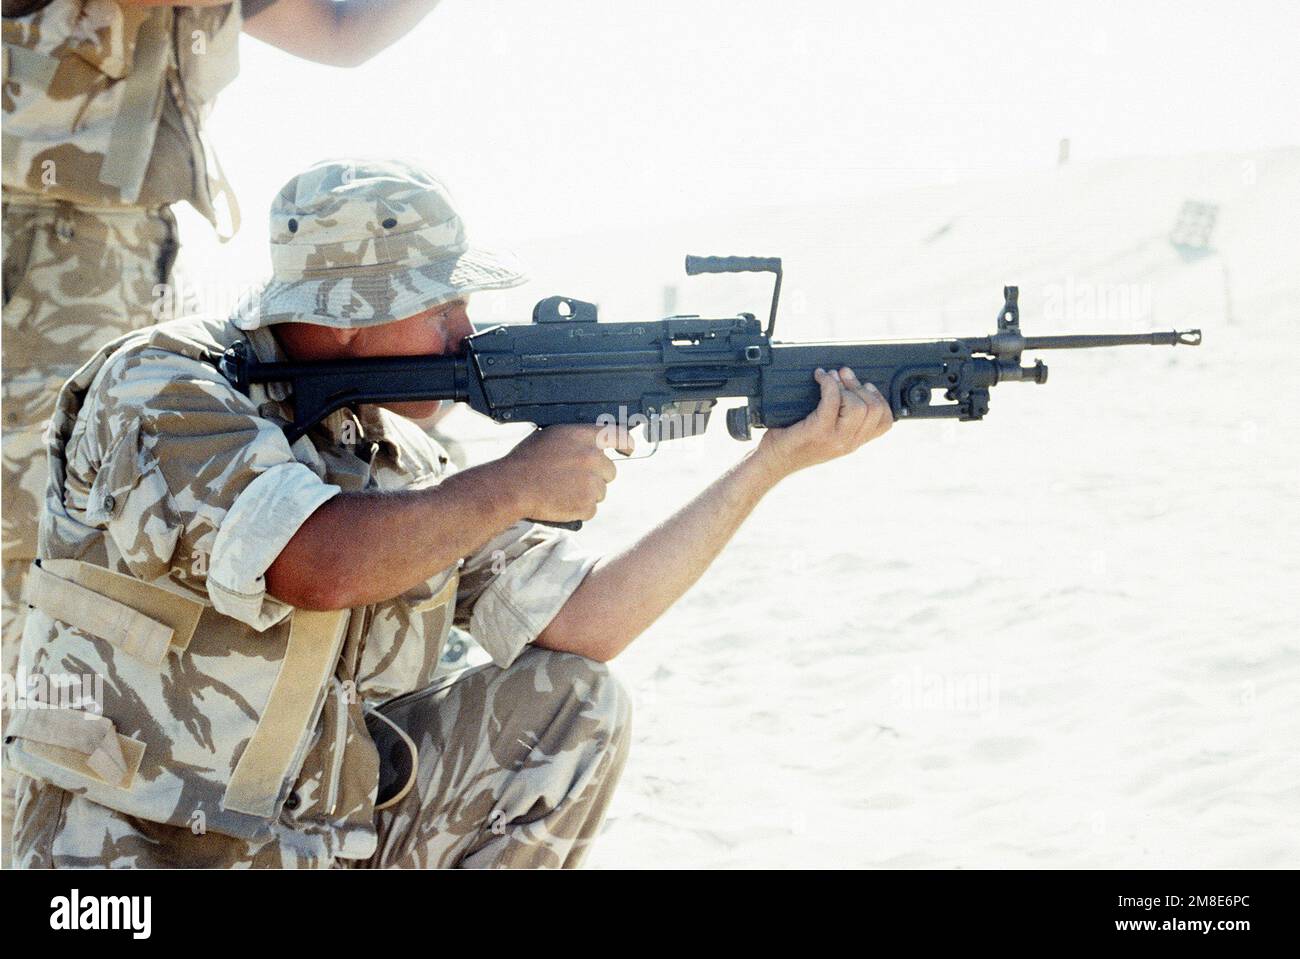 A British soldier from the Queen's Dragoon Guards fires an M-249 squad automatic weapon (SAW) while participating in weapons training with the Marines of 7th Platoon, 1ST Force Reconnaissance Company, at Abu Hydra Range during Operation DESERT SHIELD. Subject Operation/Series: DESERT SHIELD Country: Saudi Arabia (SAU) Stock Photo